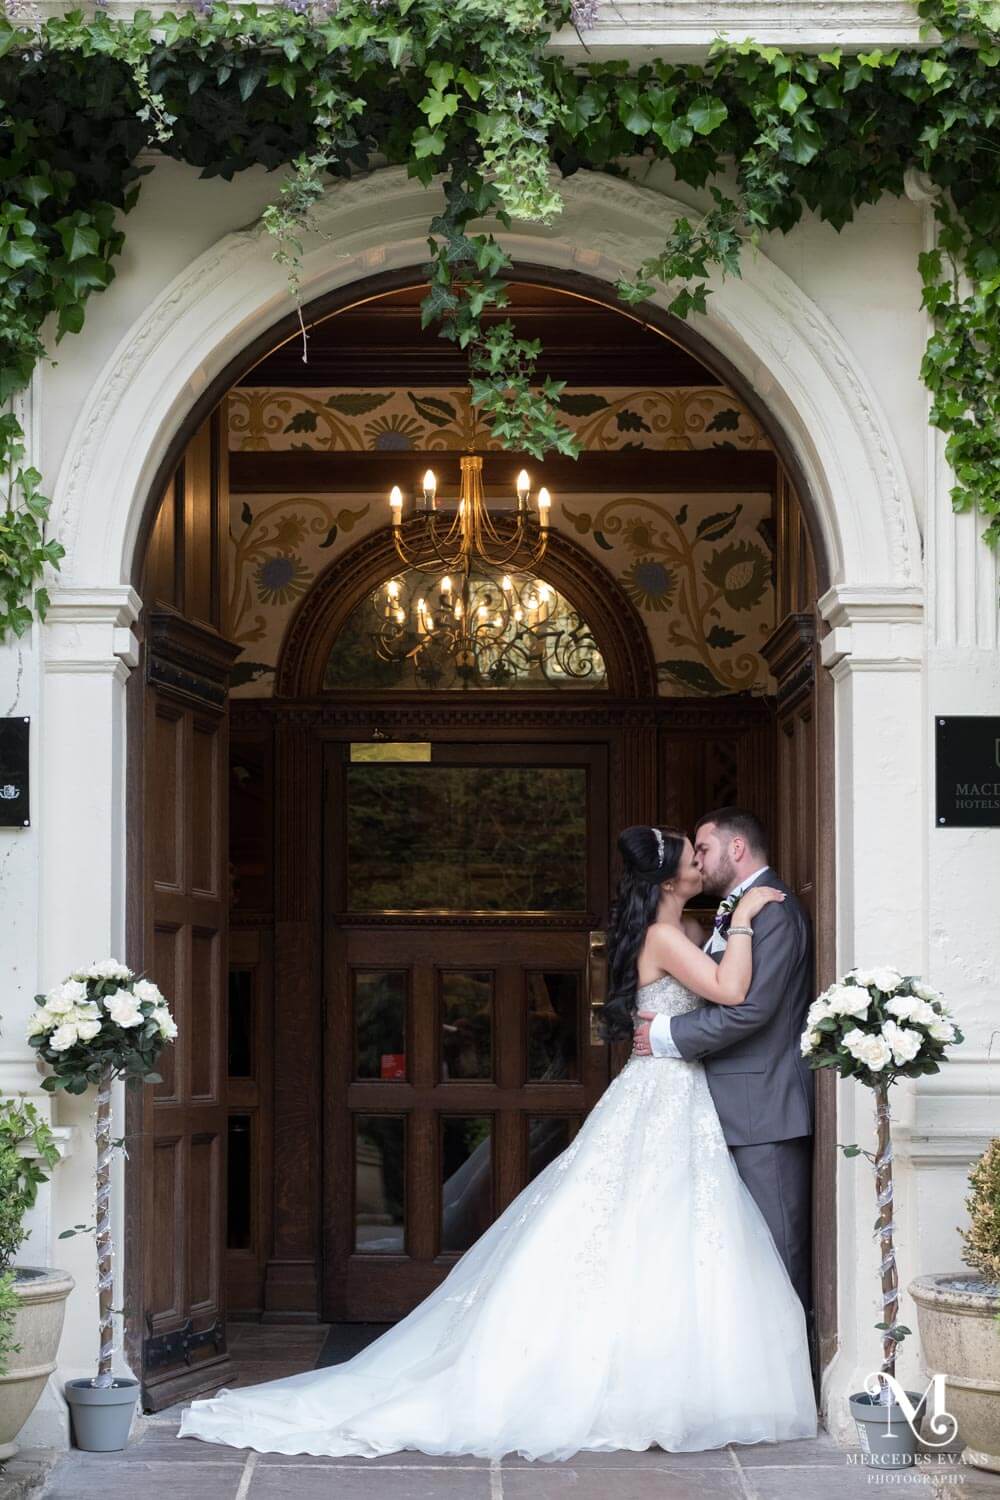 the newly weds kiss as they stand in the front doorway at Frimley Hall